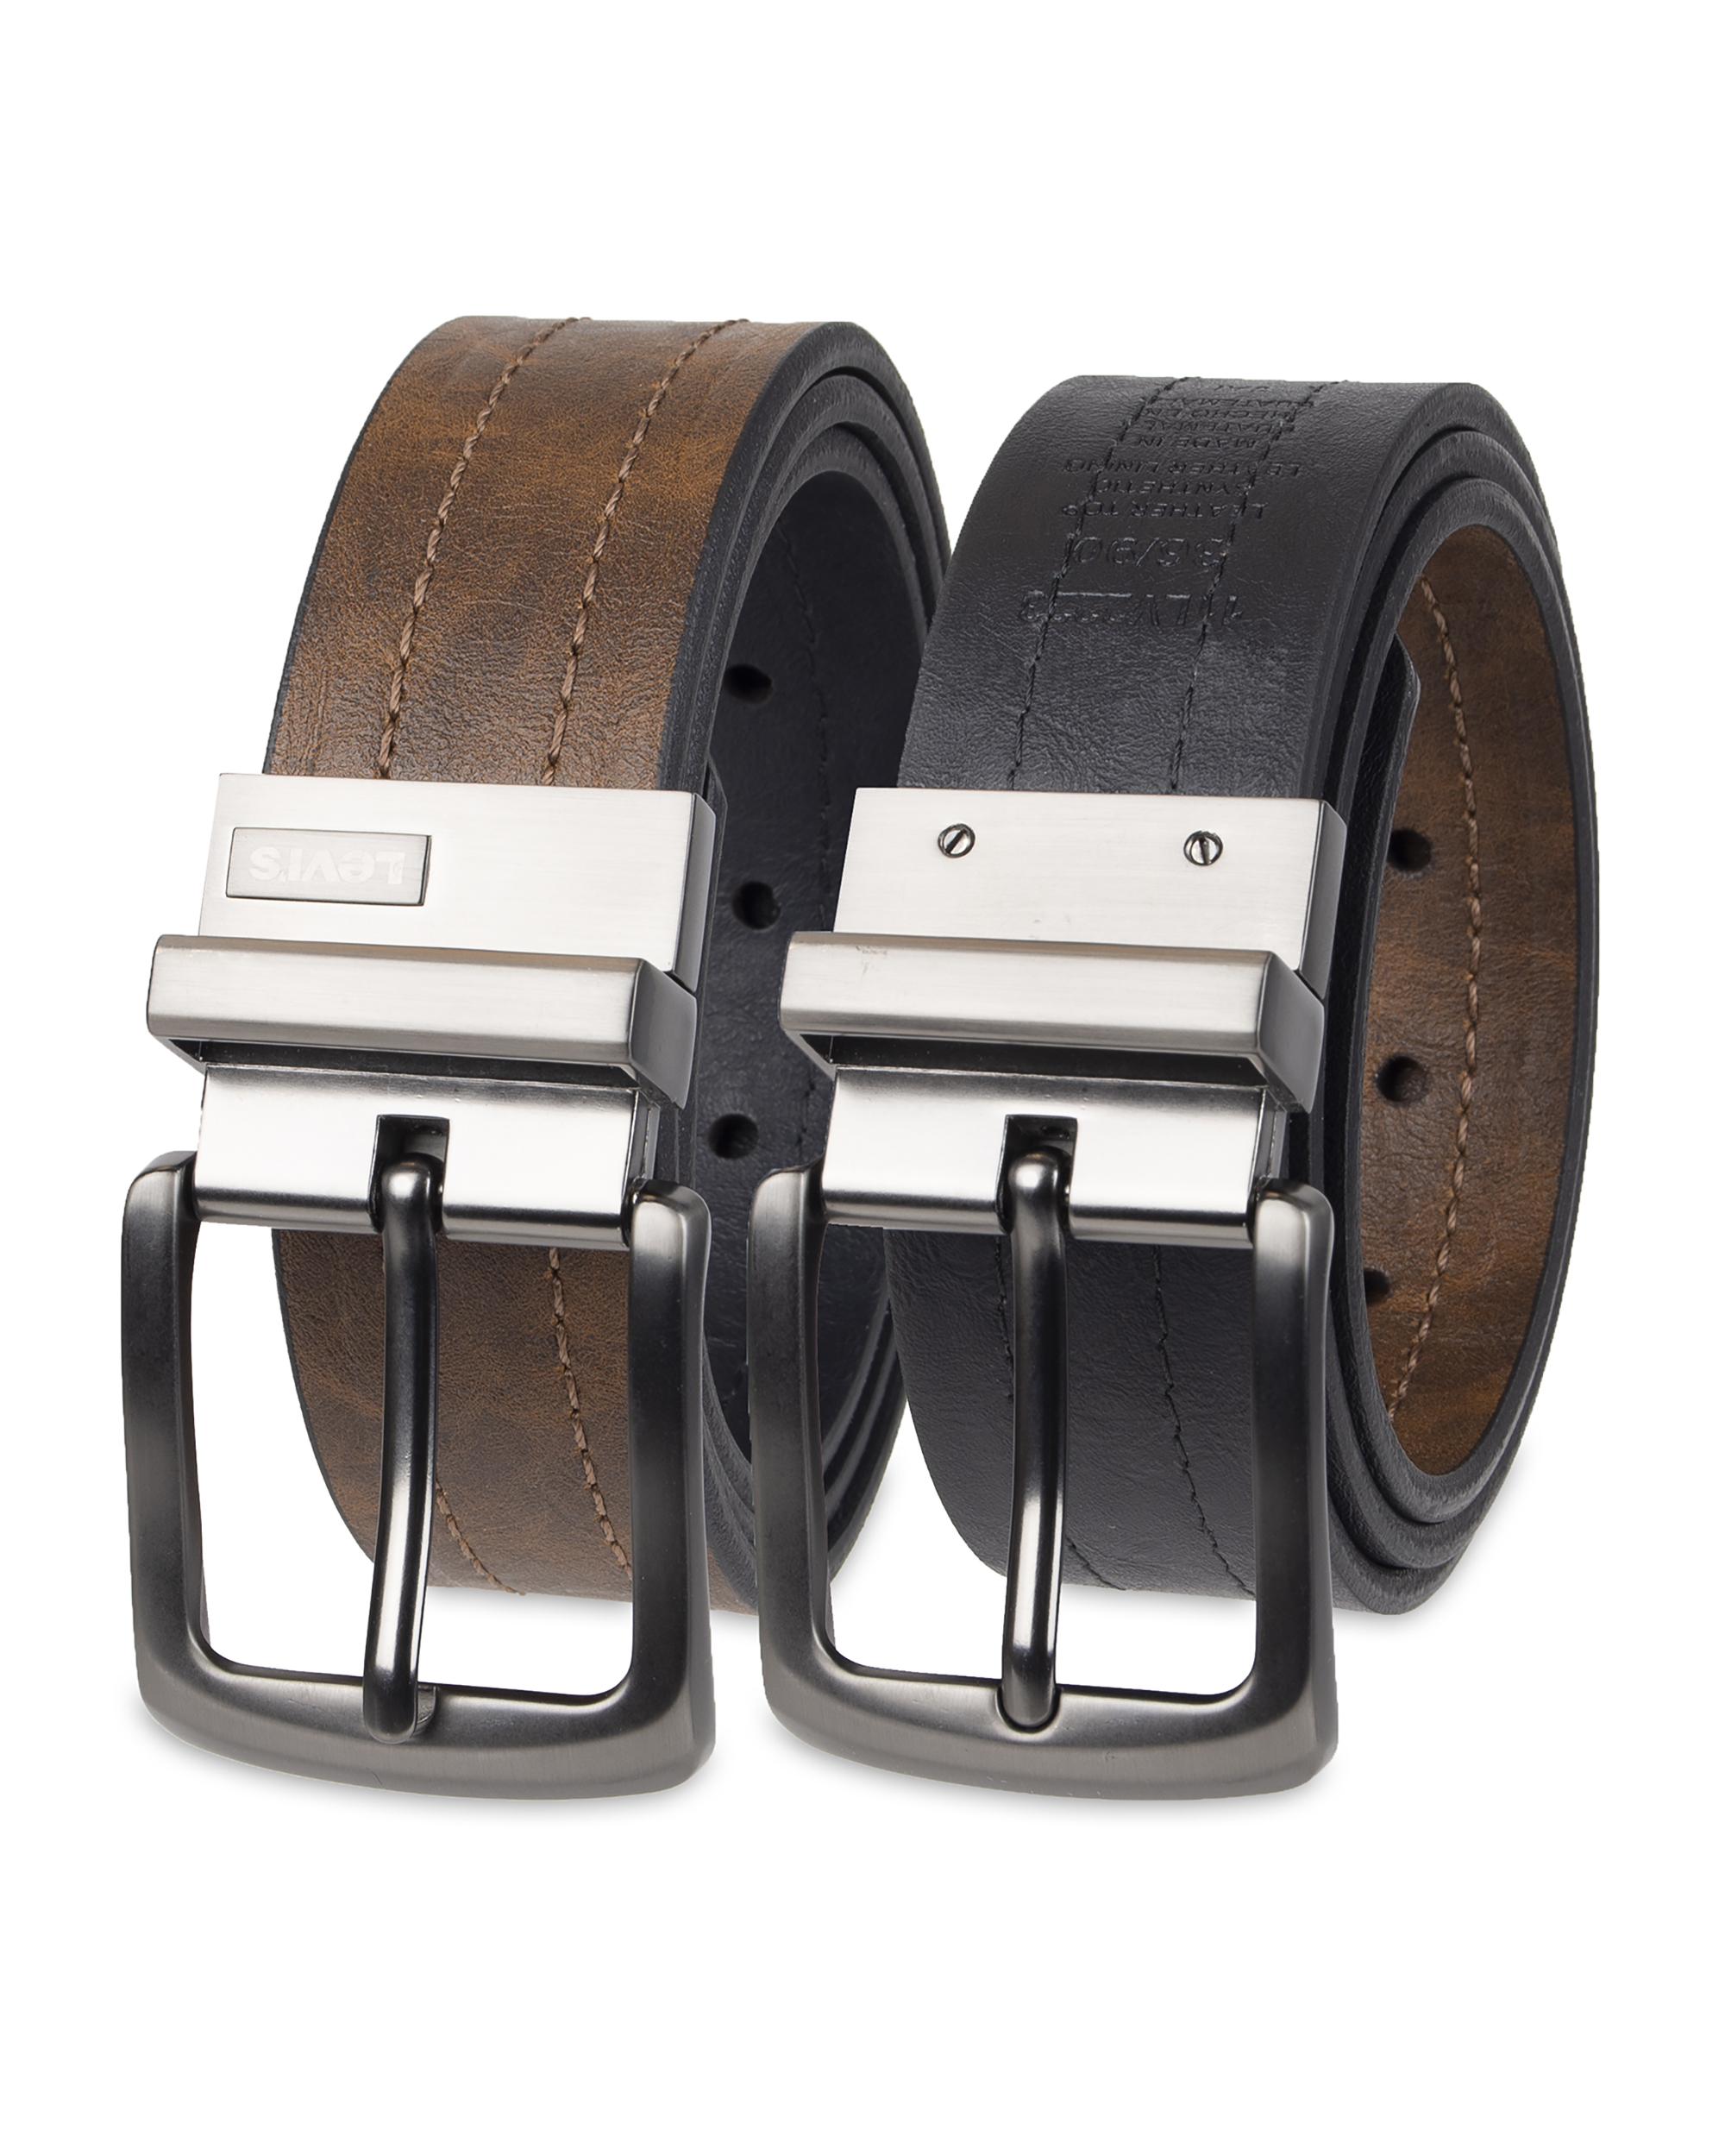 Levi's Men's Two-in-One Reversible Casual Belt, Brown/Black - image 1 of 8